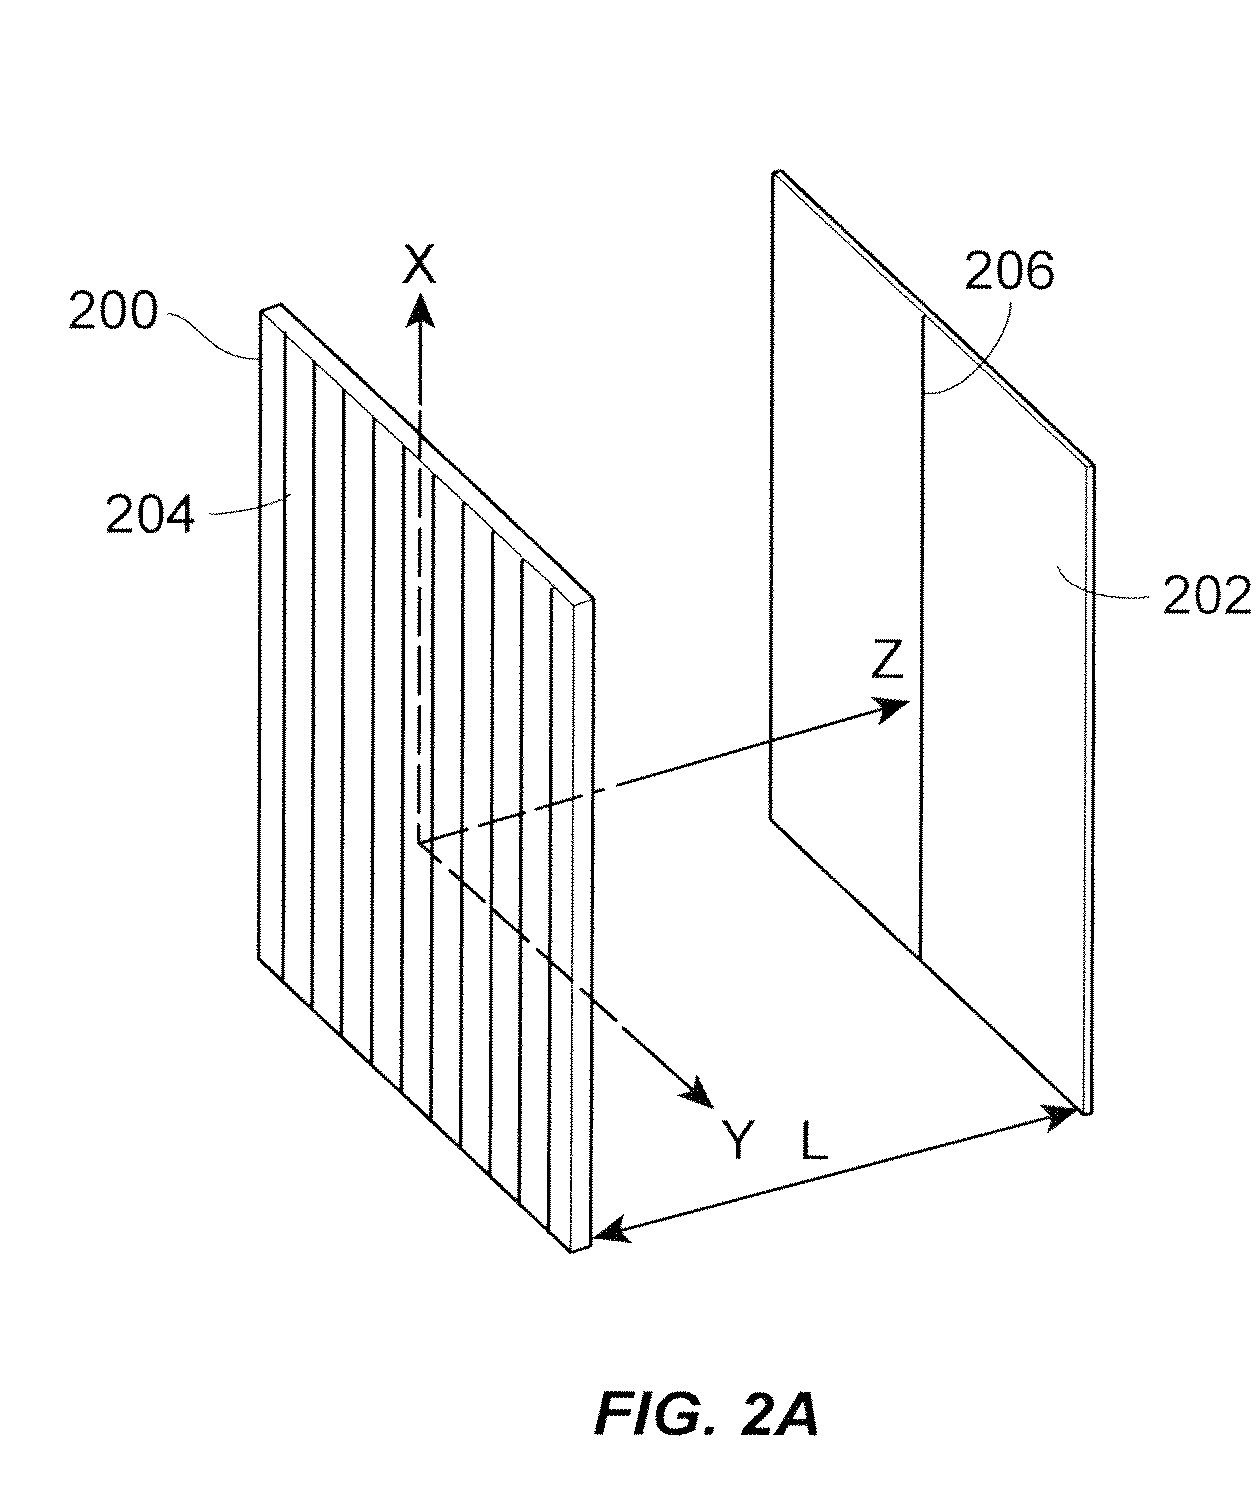 Apparatus for sub-wavelength near-field focusing of electromagnetic waves